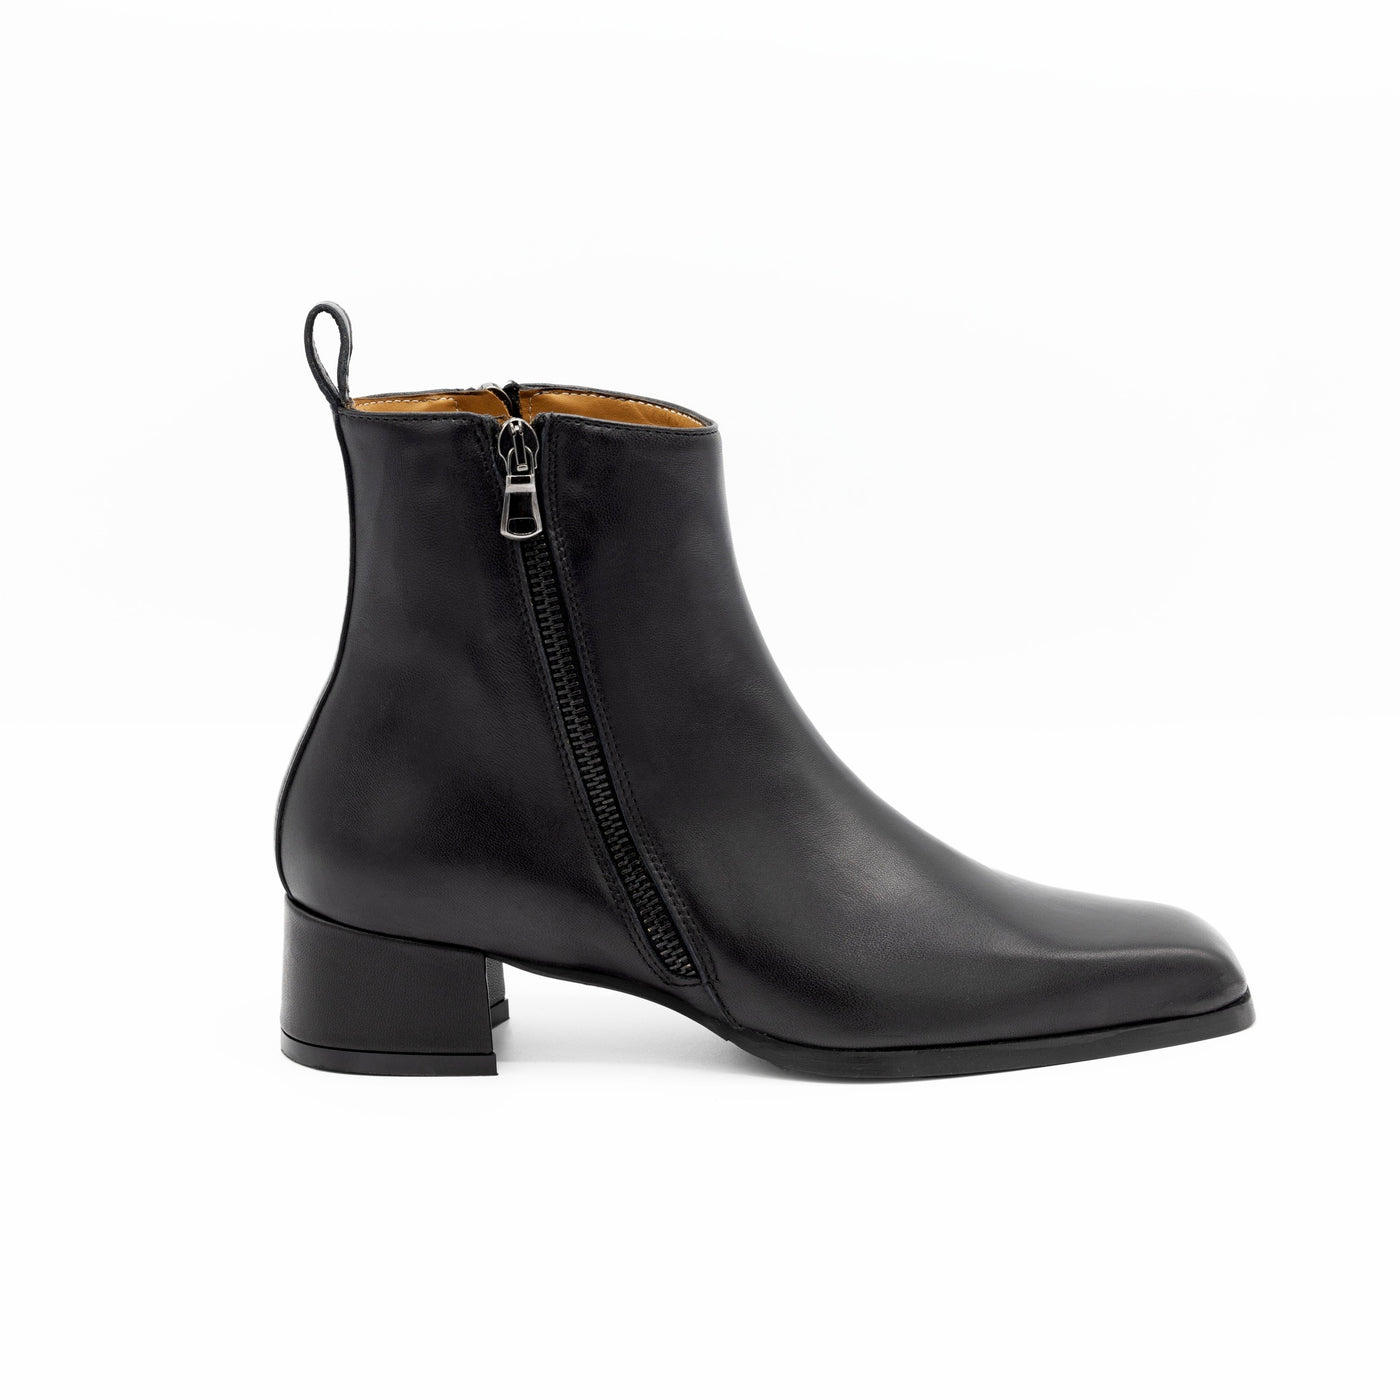 Black leather ankle boots with zippers